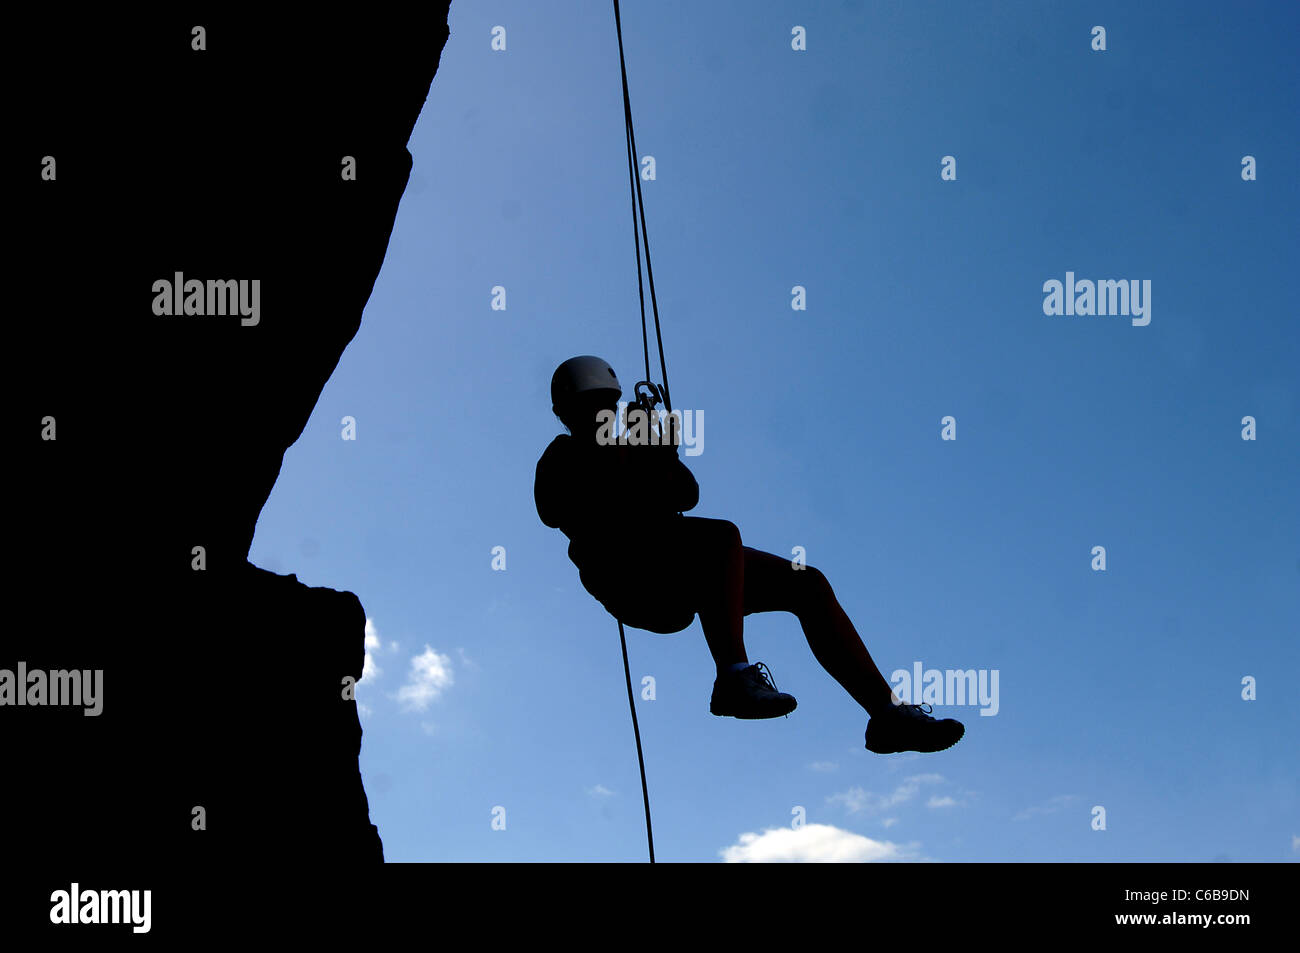 silhouette of a person Rappelling, an outdoor sport that requires  descending a steep rock during a rock climbing event Stock Photo - Alamy